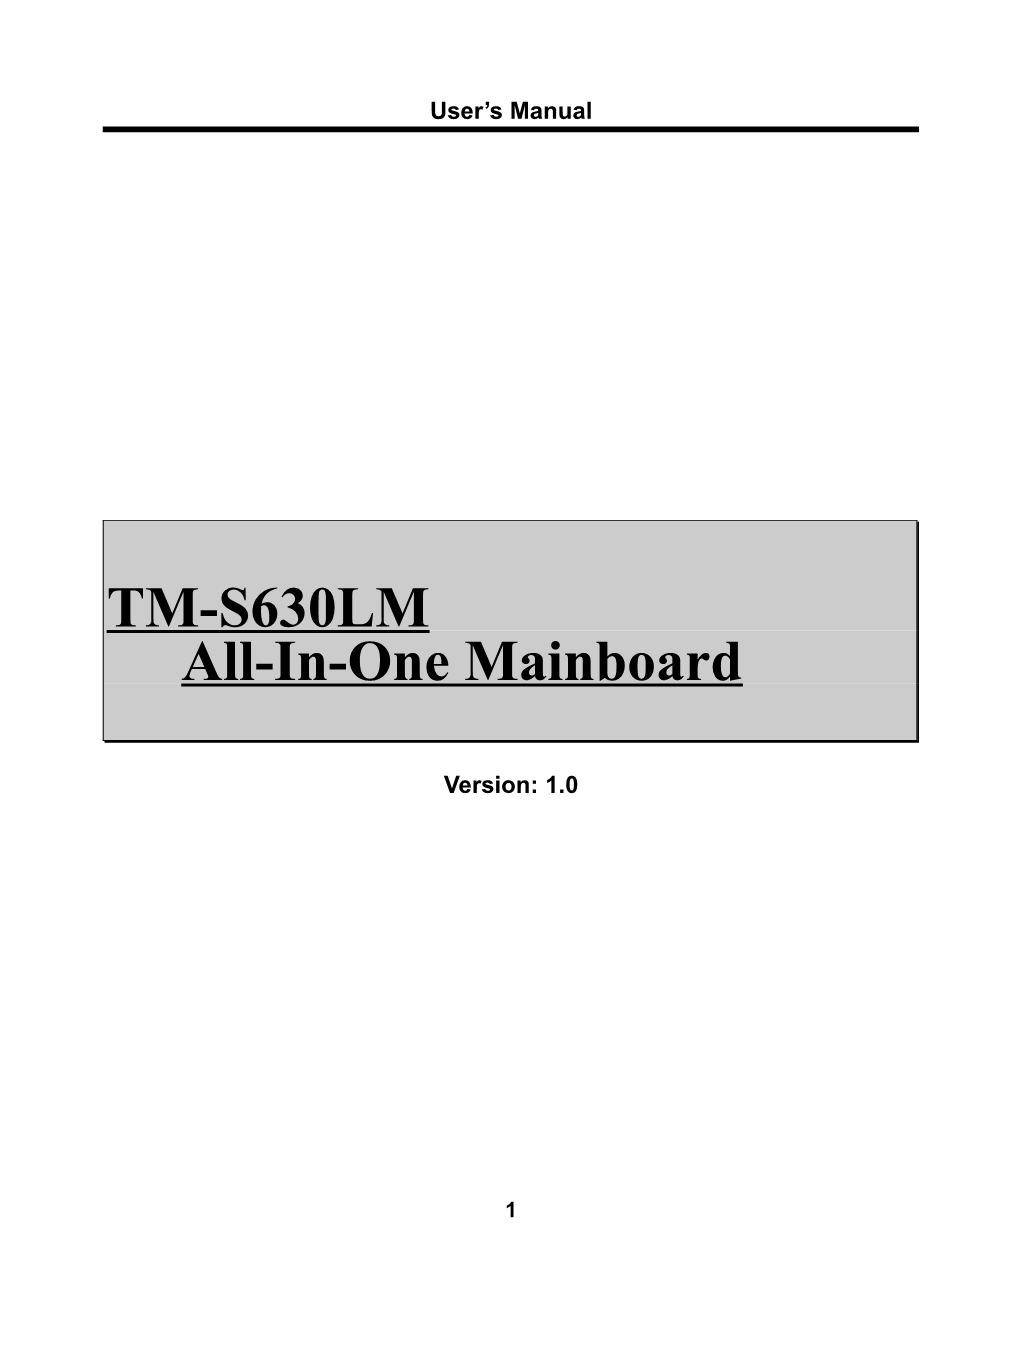 All-In-One Mainboard